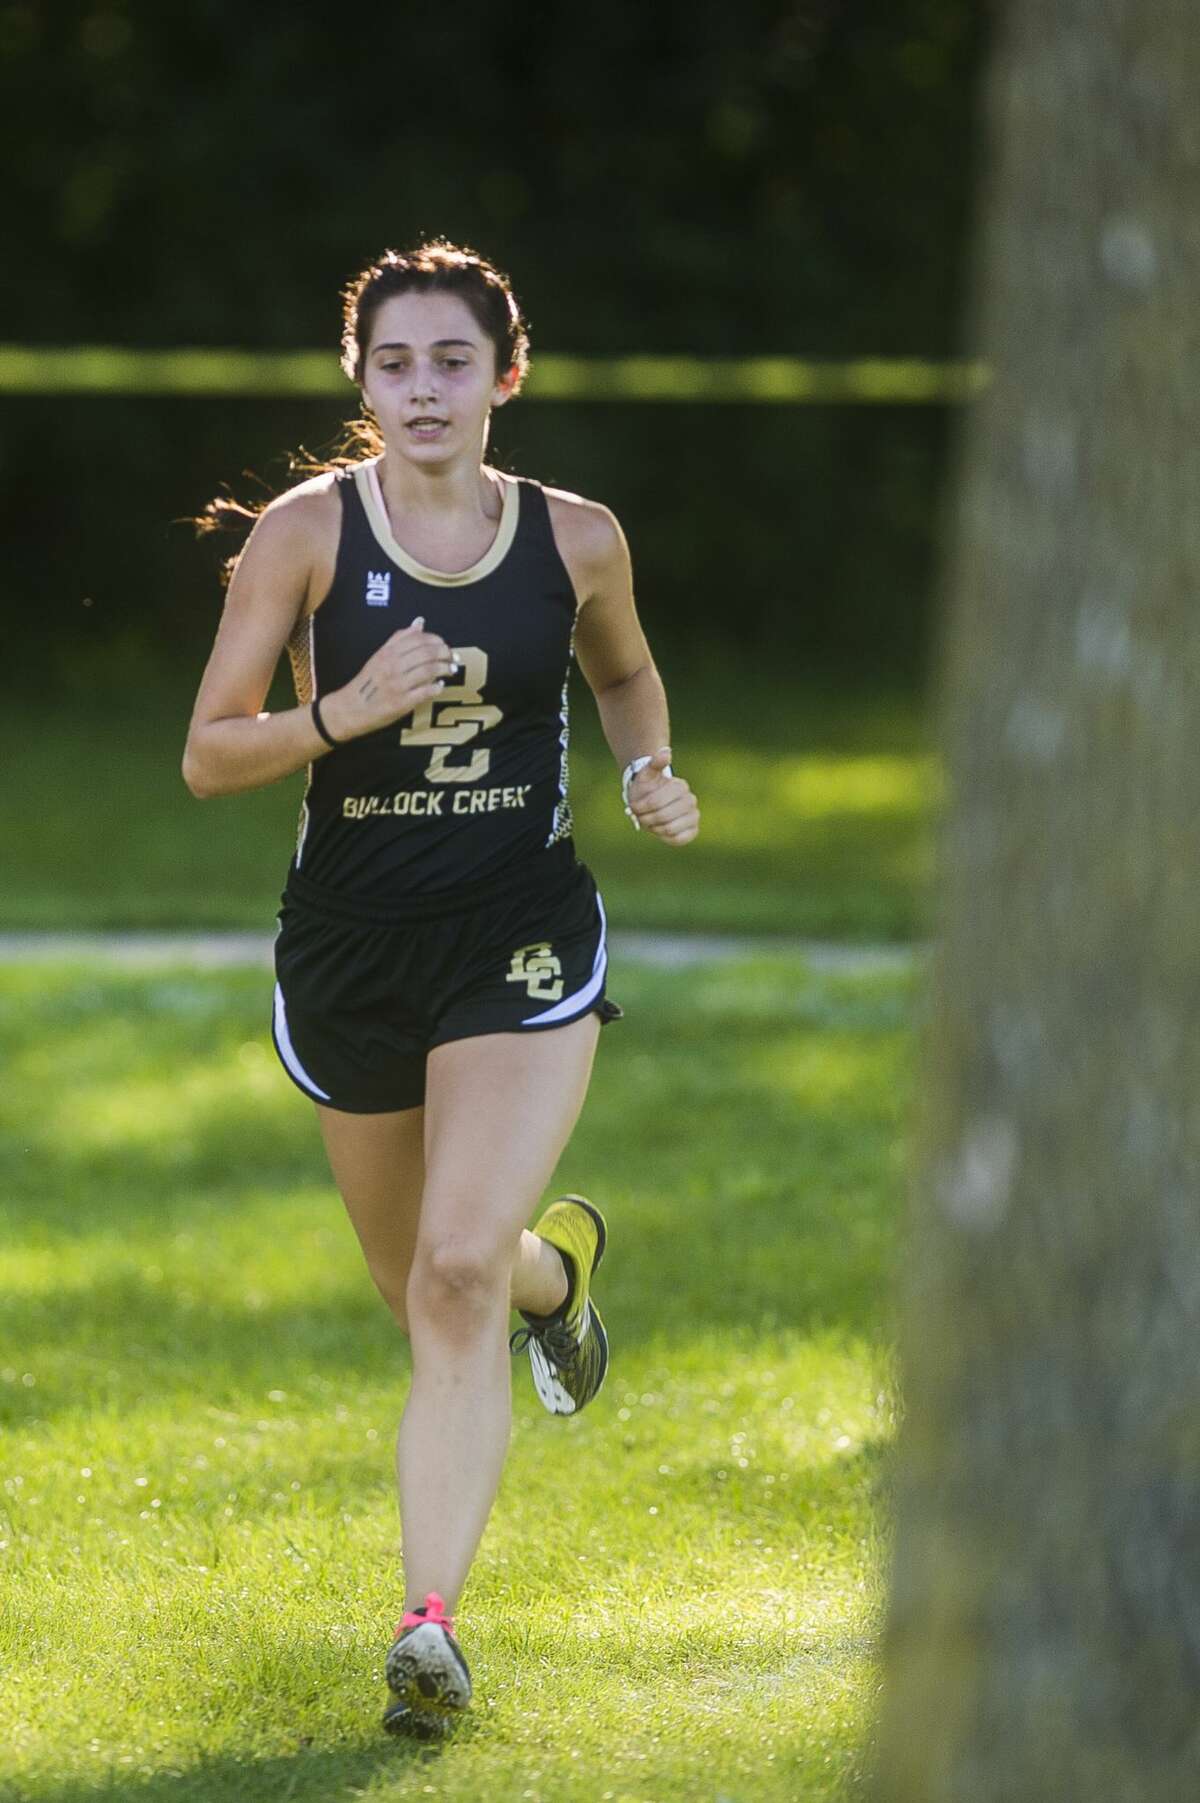 Bullock Creek's Rita Gorsuch competes in a cross country meet against runners from Dow, Meridian and Midland Wednesday, Sept. 2, 2020 at Stratford Woods Park in Midland. (Katy Kildee/kkildee@mdn.net)